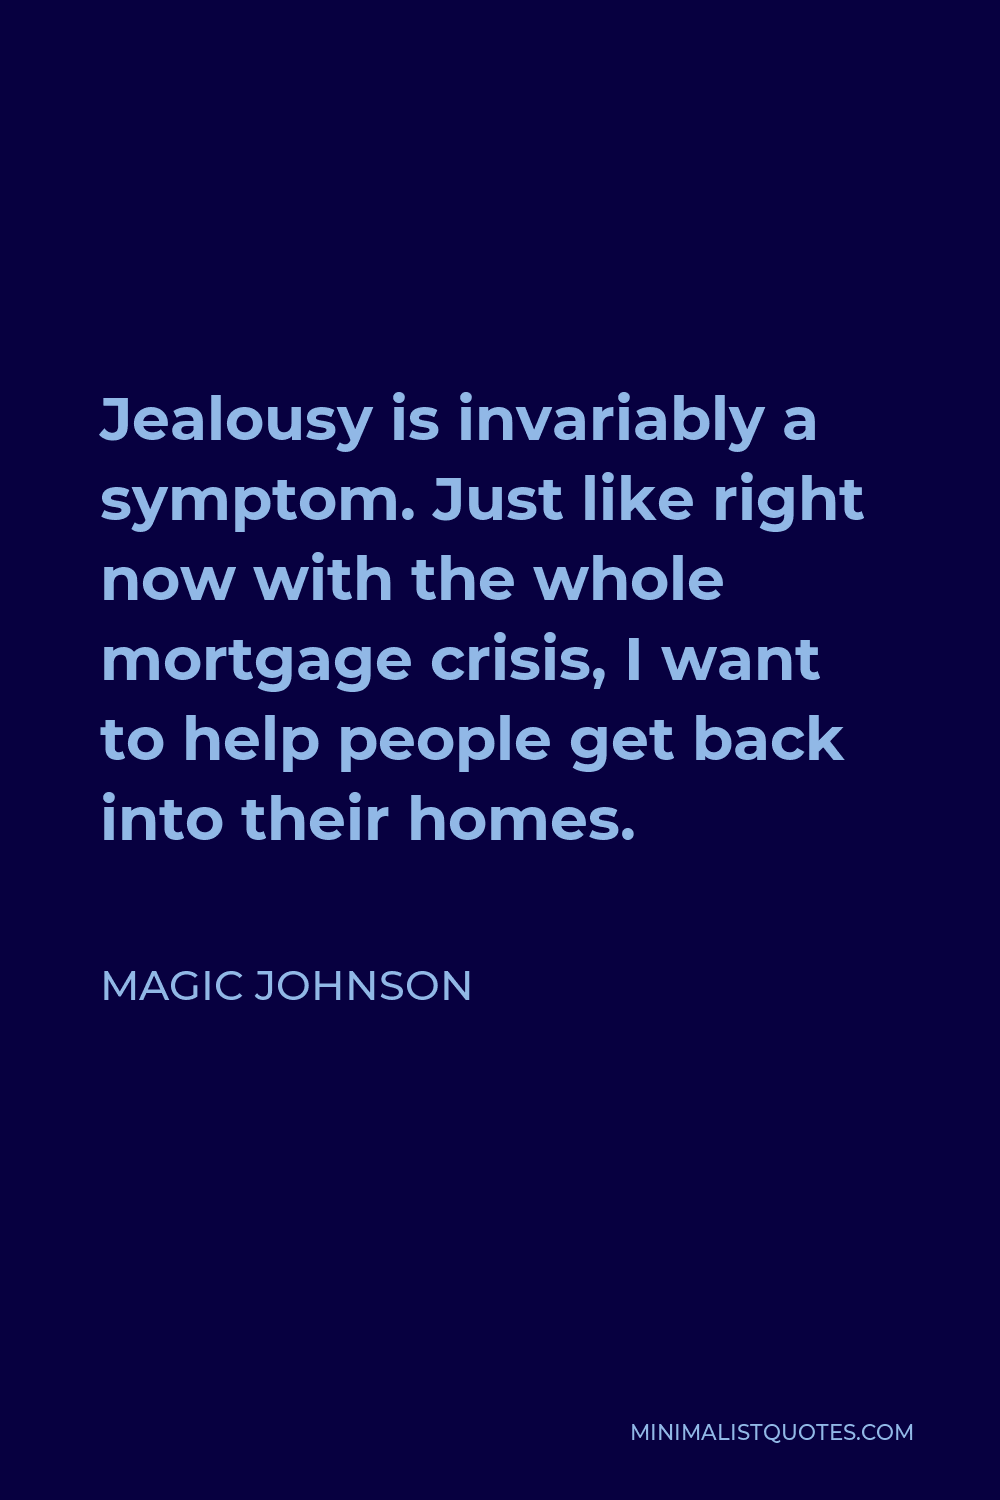 Magic Johnson Quote - Jealousy is invariably a symptom. Just like right now with the whole mortgage crisis, I want to help people get back into their homes.